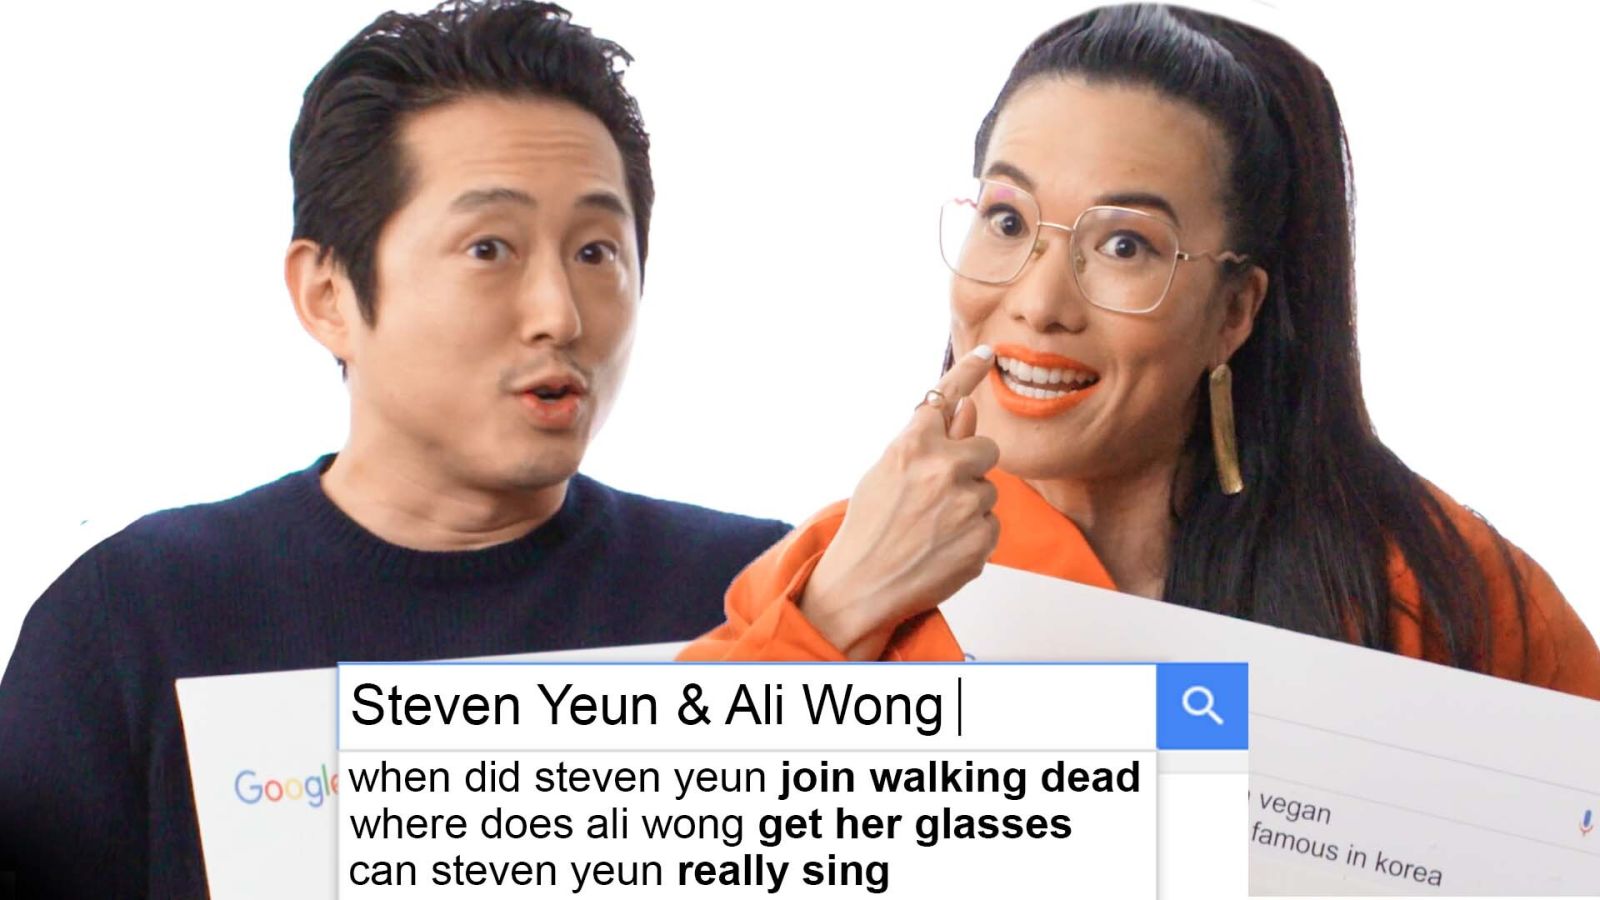 Ali Wong & Steven Yeun Answer the Web's Most Searched Questions